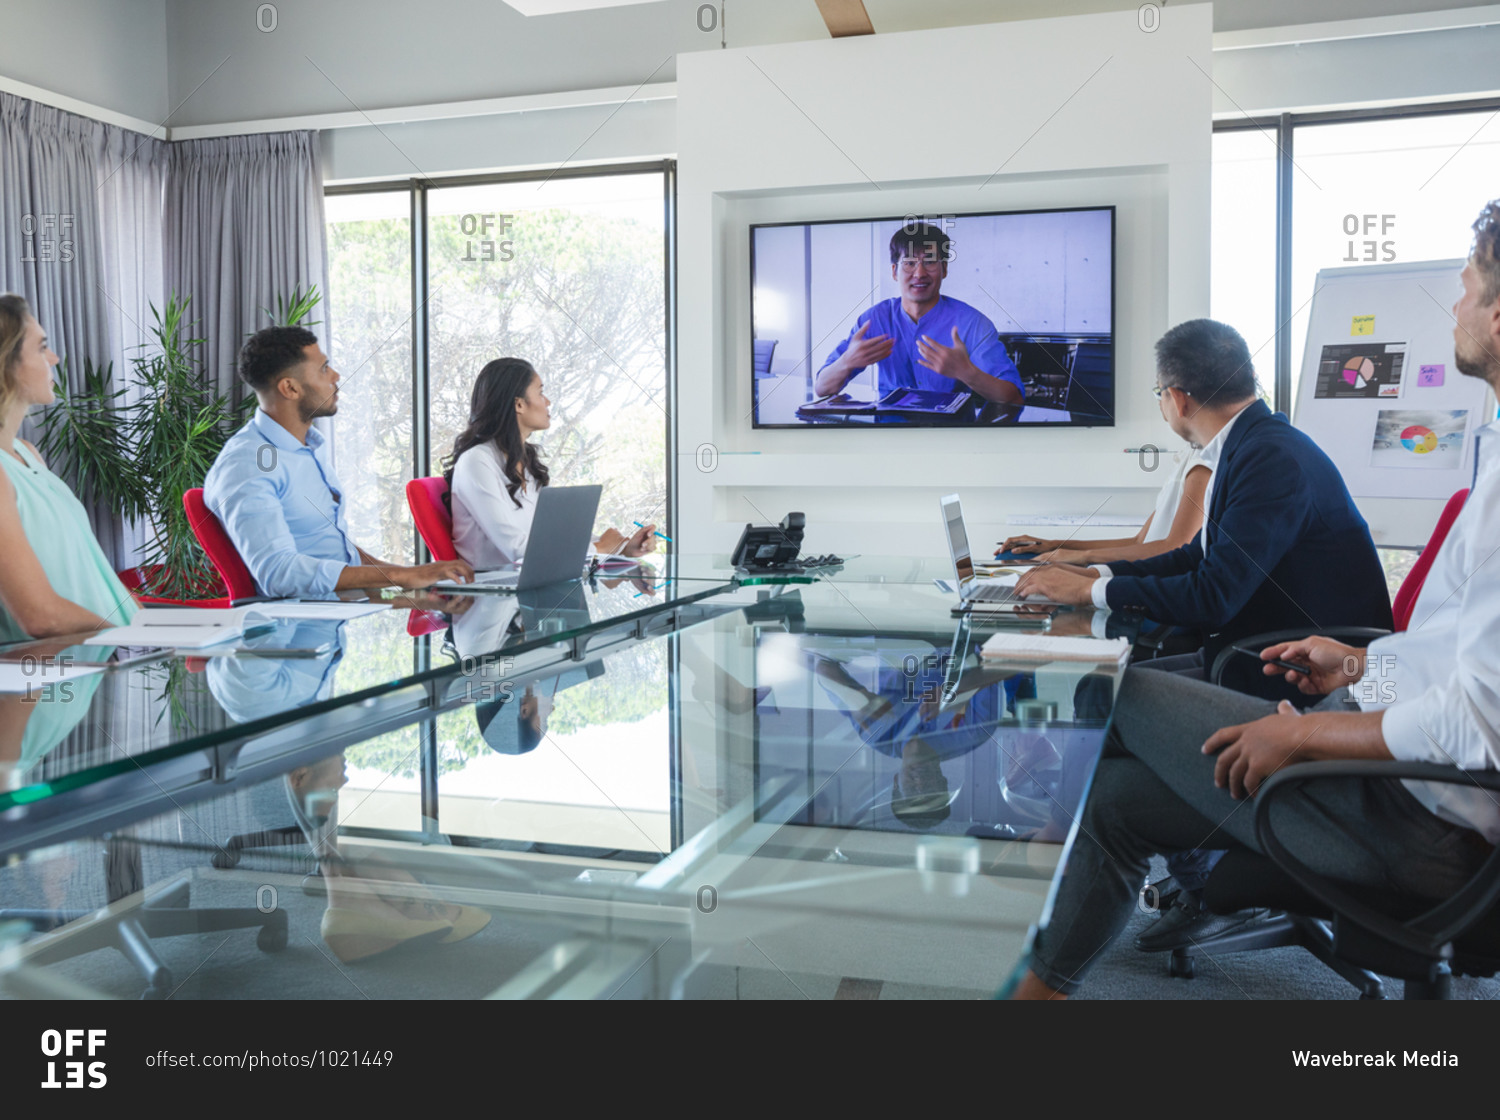 Multi-ethnic group of male and female business colleagues sitting in video conference with an Asian male colleague talking on screen. Creative business professionals working in a busy modern office.